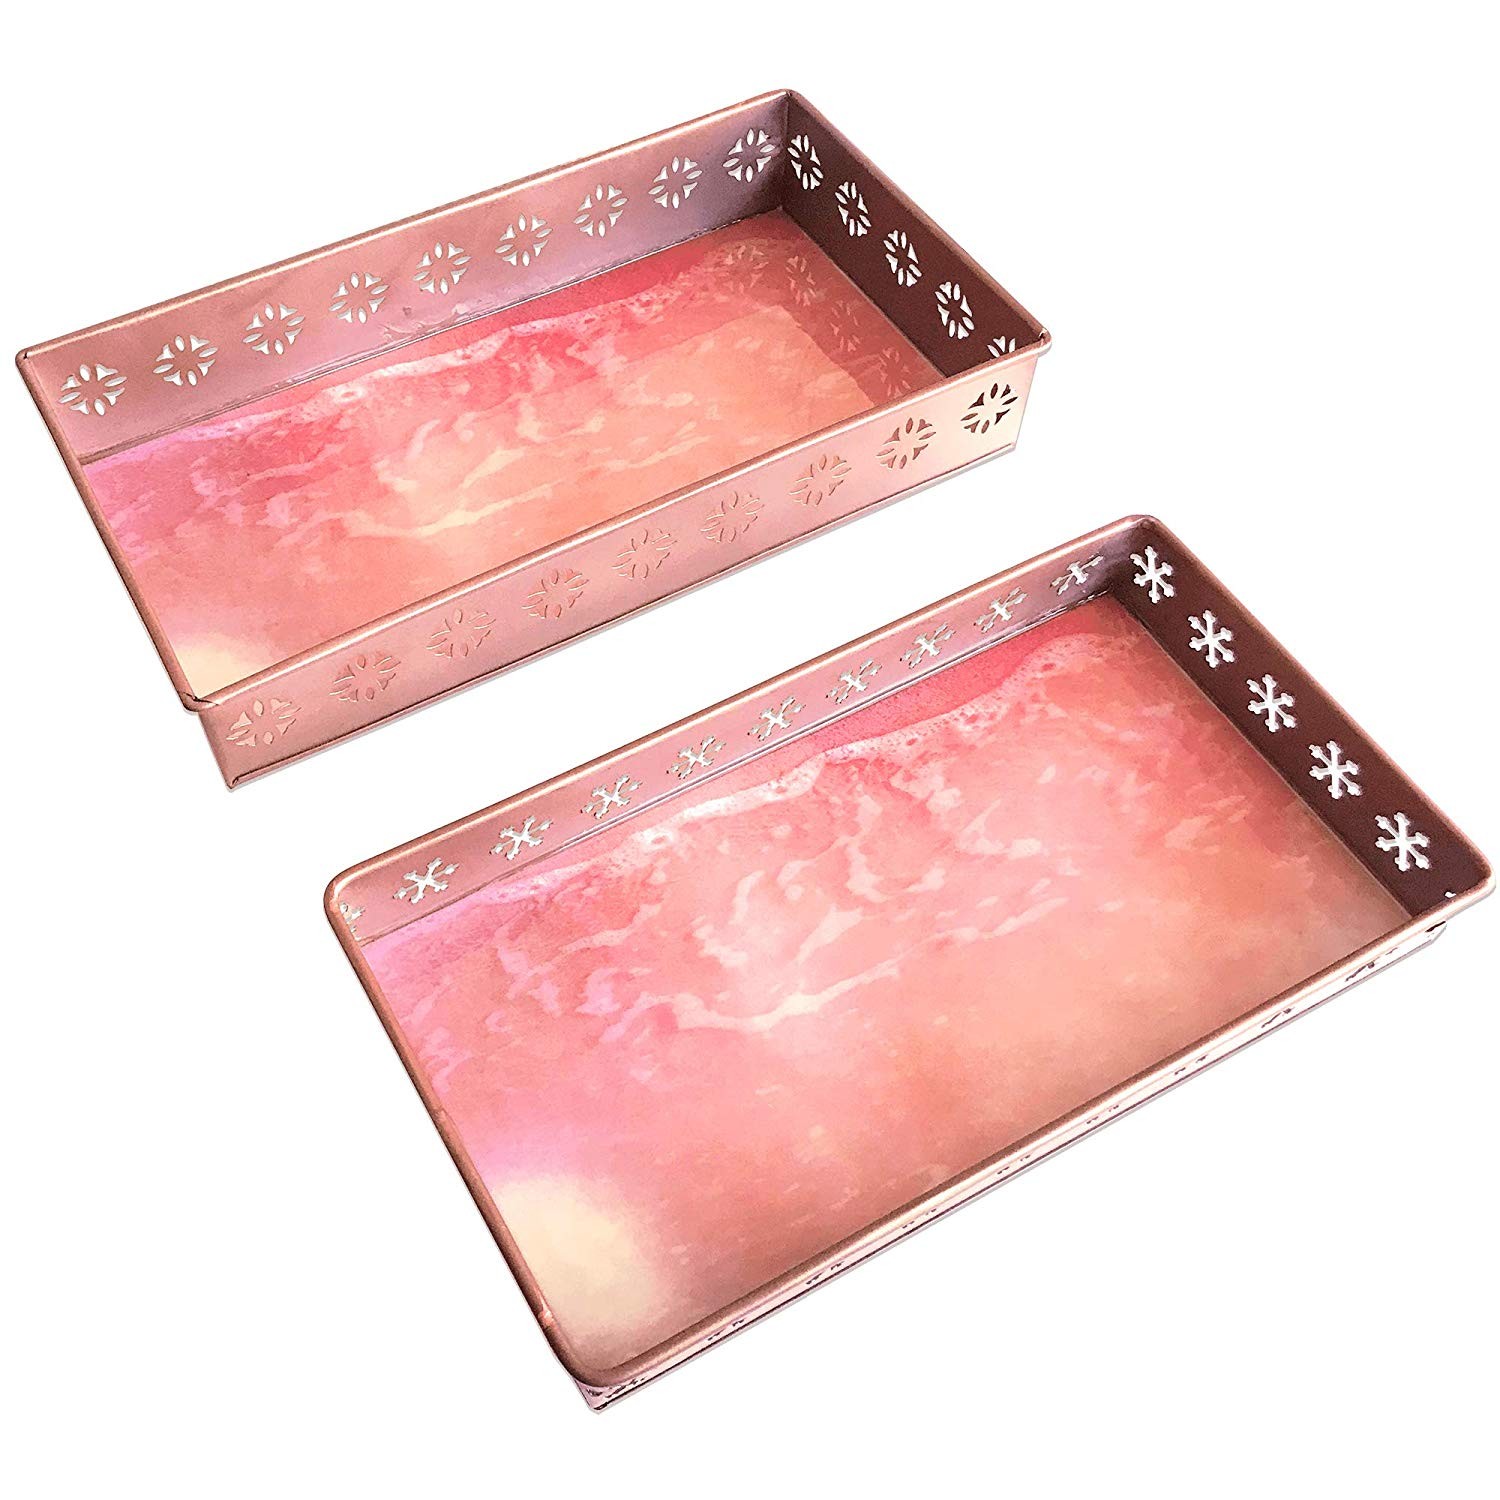 Decorshore Set Of 2 Metal Decorative Trays Serving Tray With Rose Gold Pink